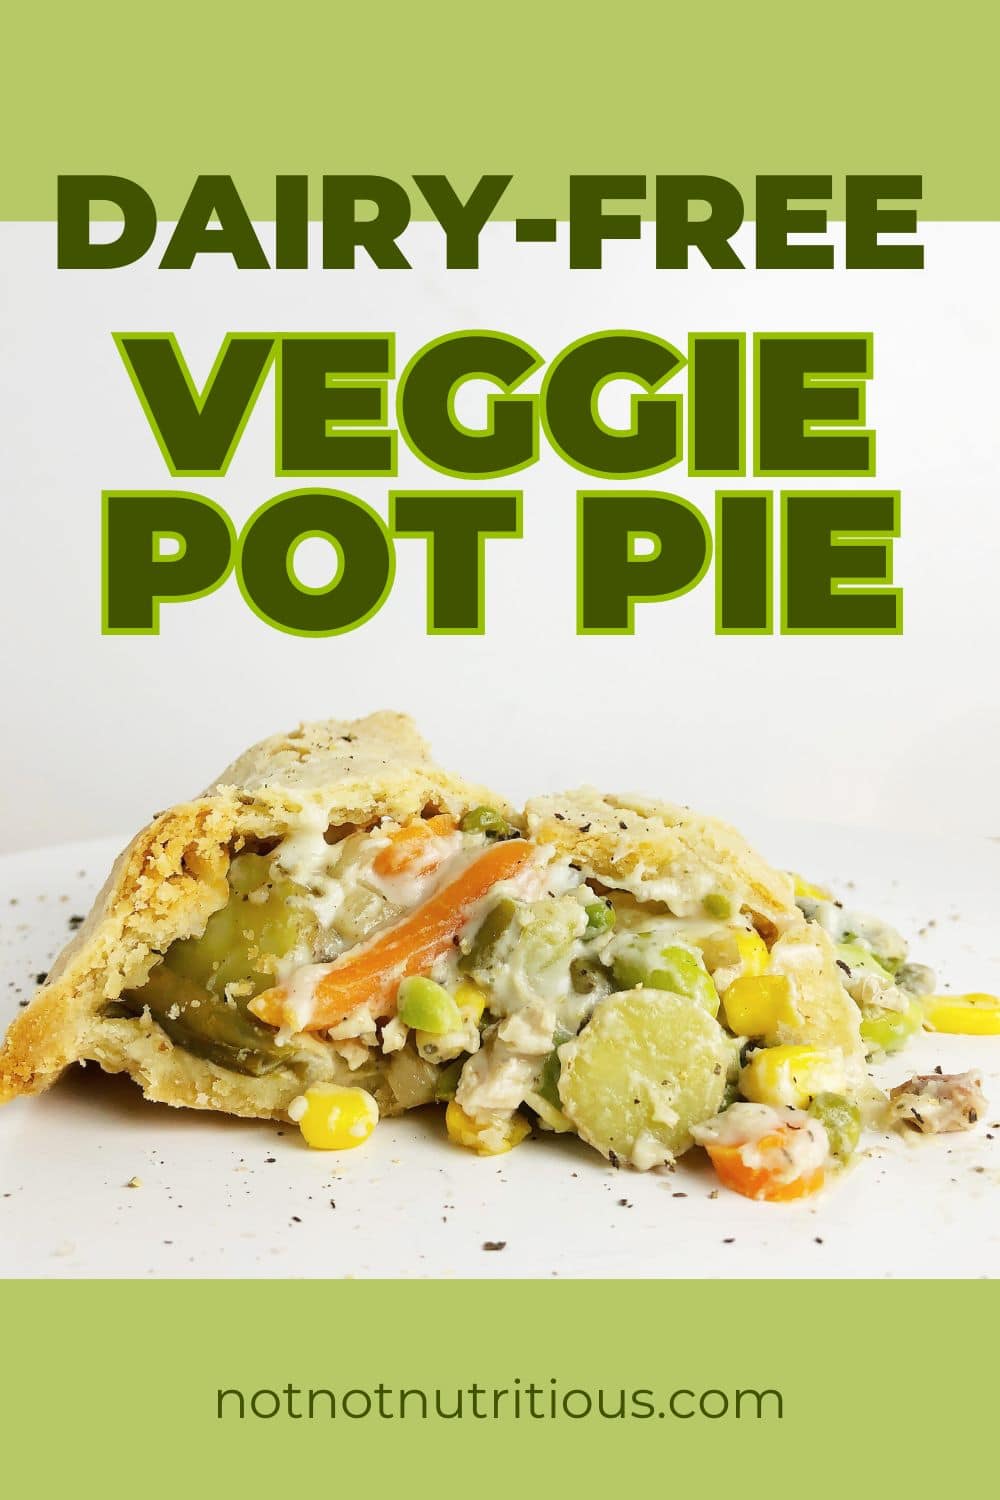 Pin for Dairy-Free Veggie Pot Pie, with close up image of a slice of the pot pie